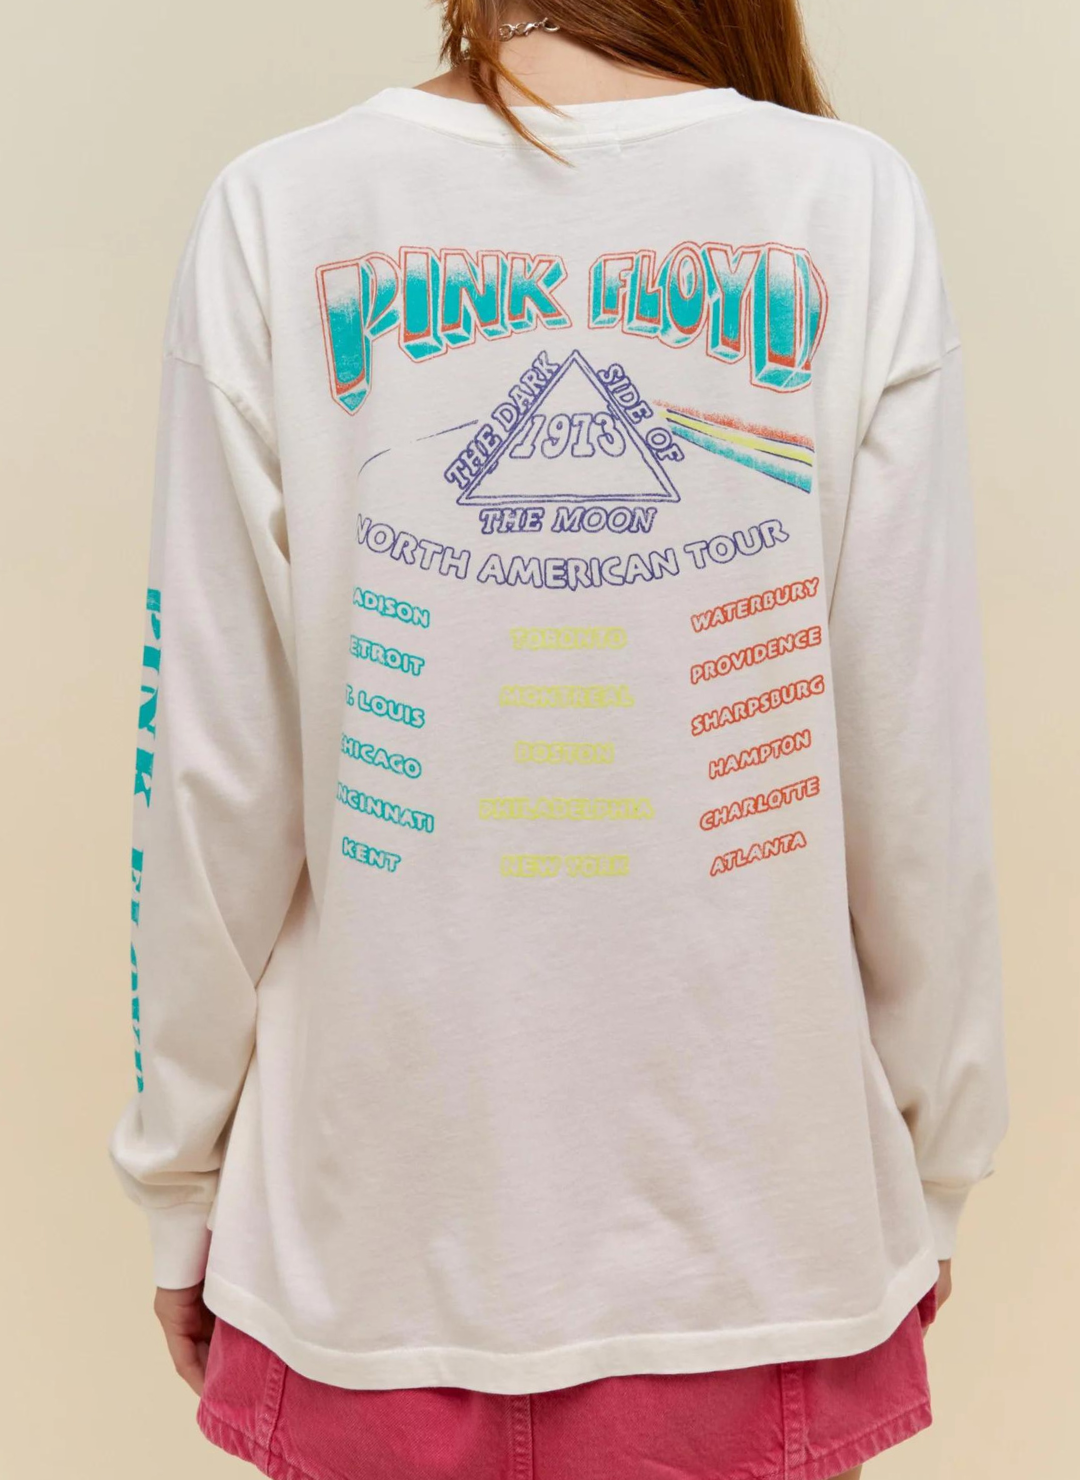 Back view of model wearing white Pink Floyd Tee with "The Dark Side of the Moon" North American Tour locations graphic.